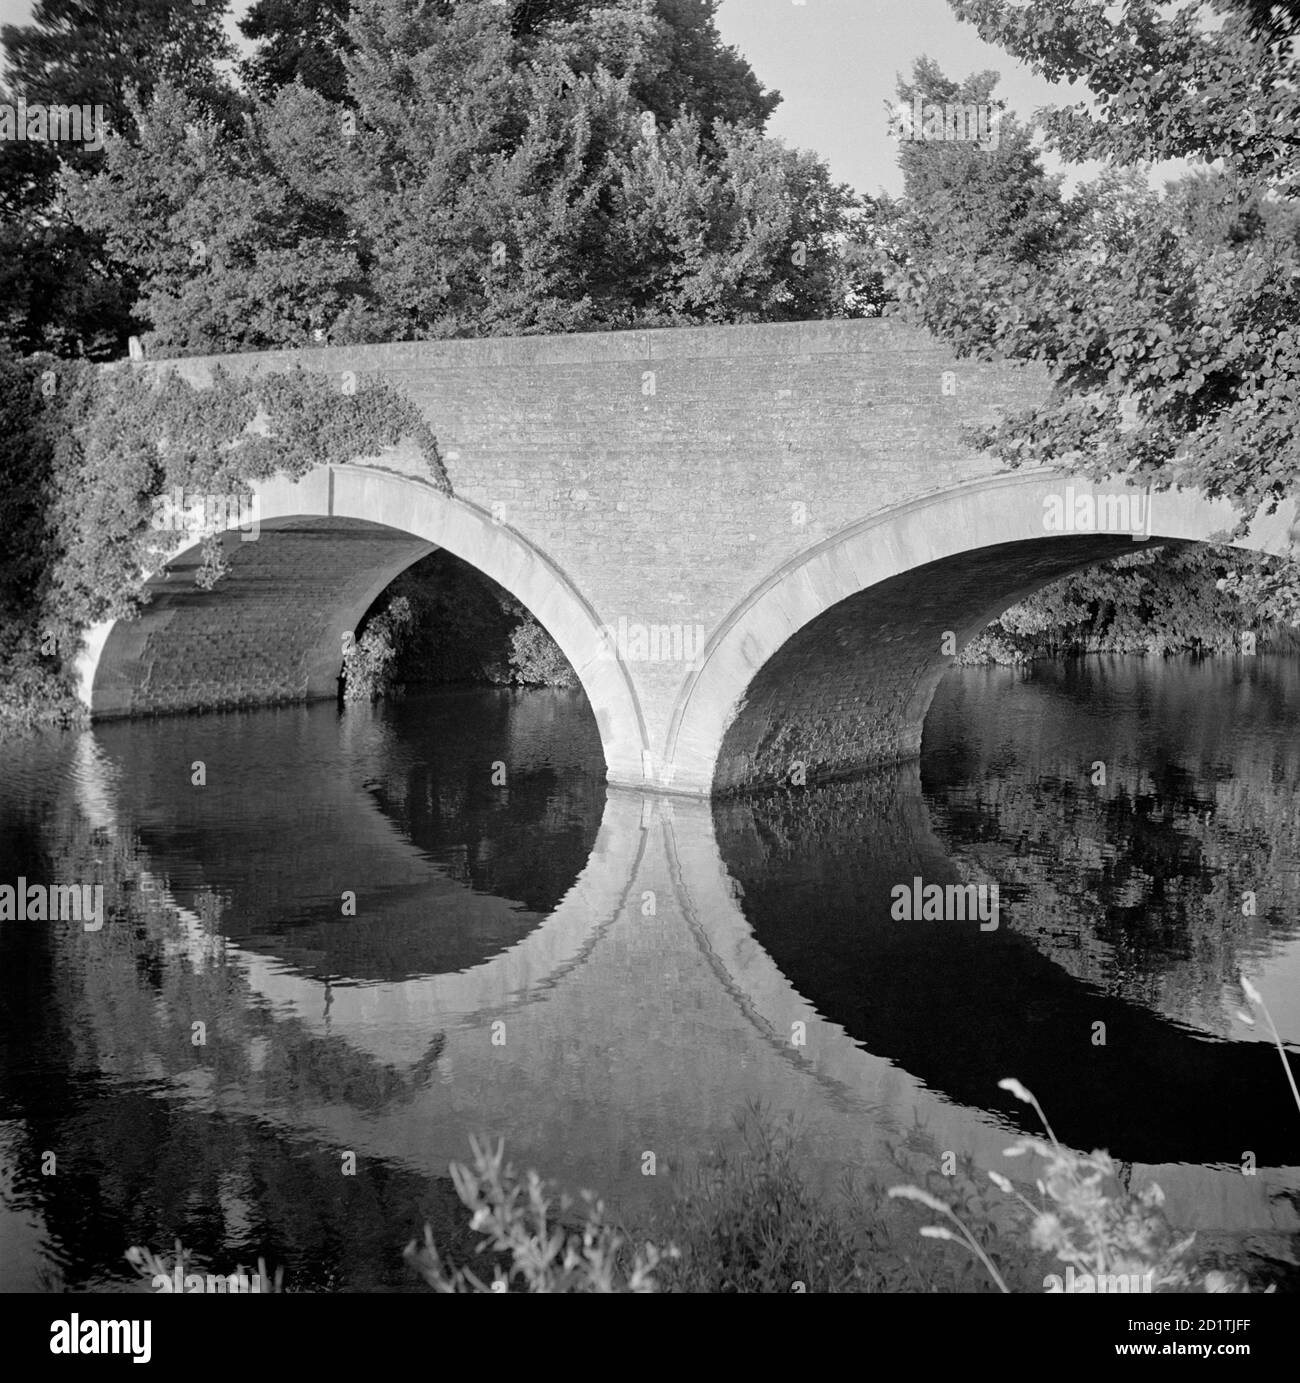 GODSTOW BRIDGE, Oxfordshire. General view of the Godstow Bridge in Oxford showng two spans over the river Thames. It was built in 1792. Photographed by Eric de Mare between 1945 and 1980. Stock Photo